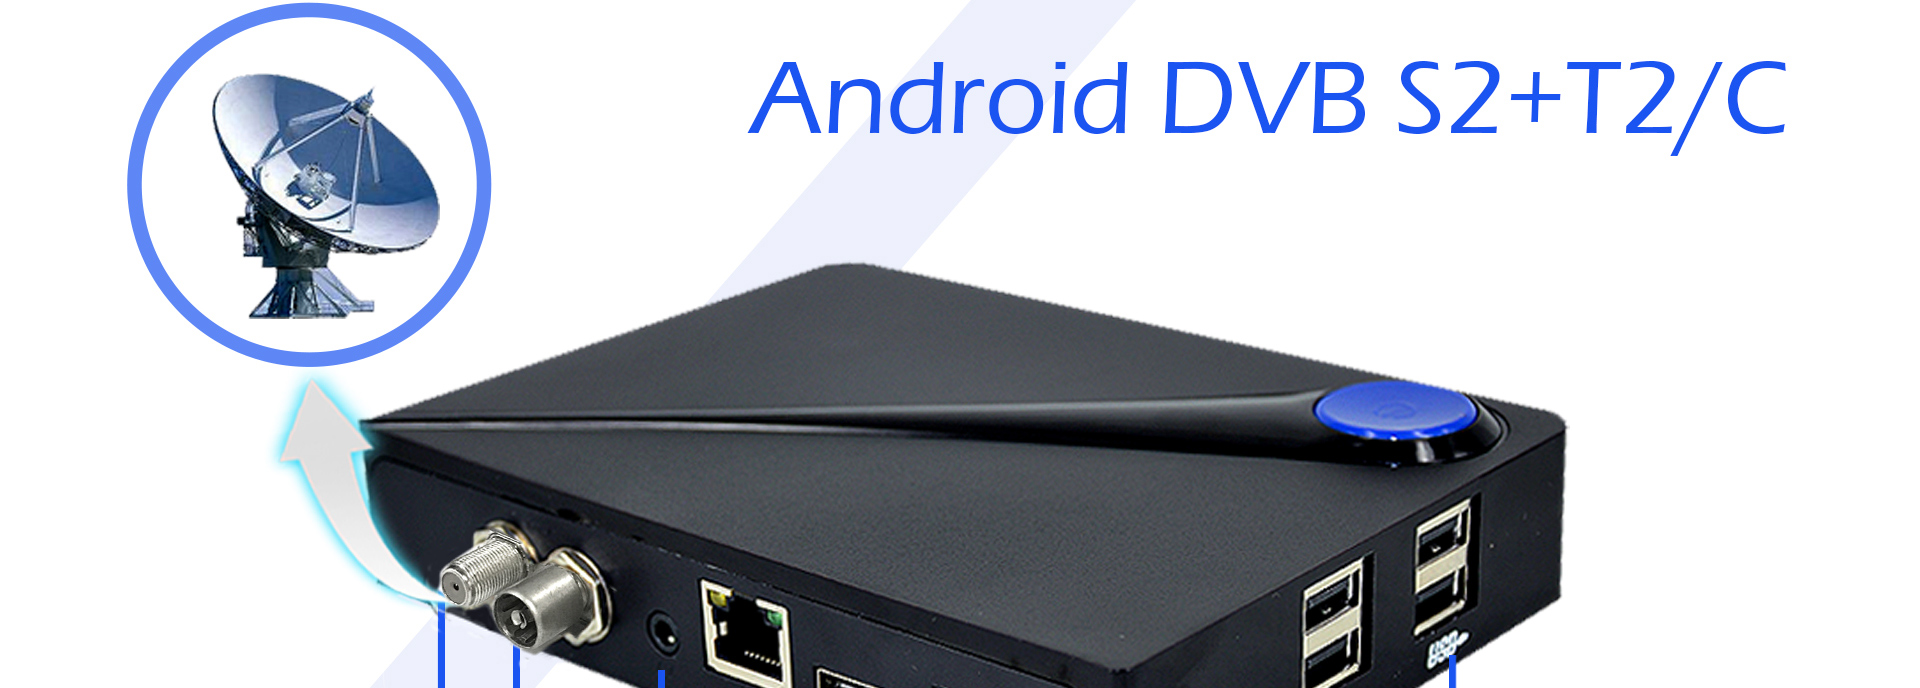 C300 Android DVB S2 T2/C